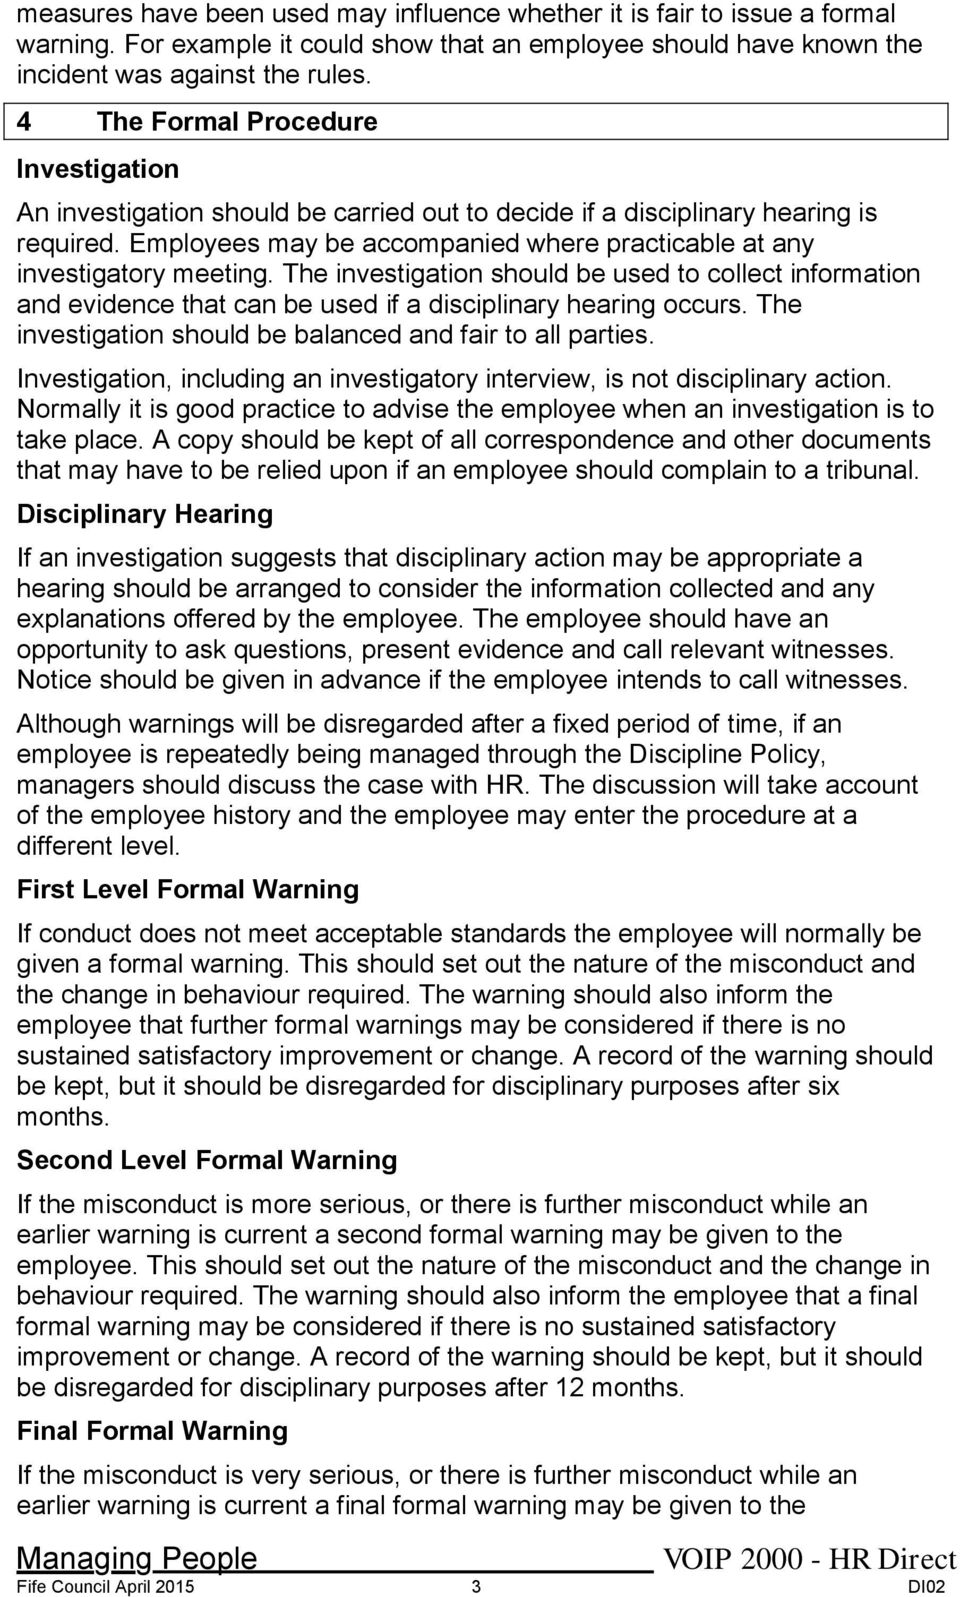 Employees may be accompanied where practicable at any investigatory meeting. The investigation should be used to collect information and evidence that can be used if a disciplinary hearing occurs.